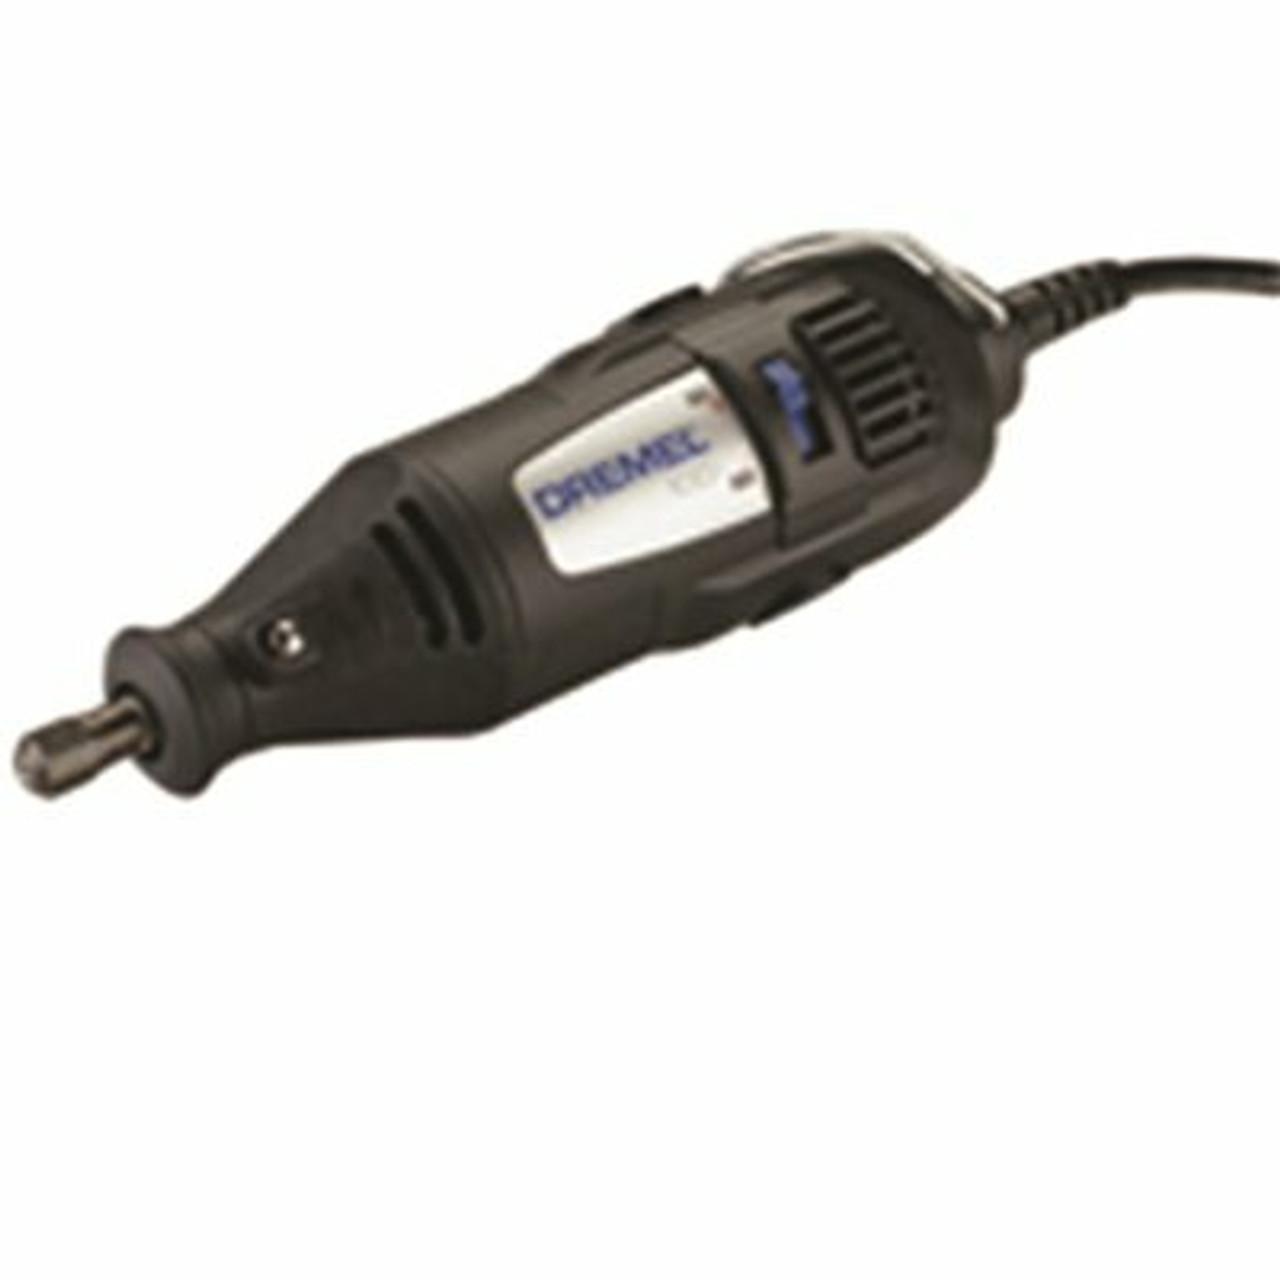 Dremel 100 Series 0.9 Amp Single Speed Corded Rotary Tool Kit With 7 Accessories